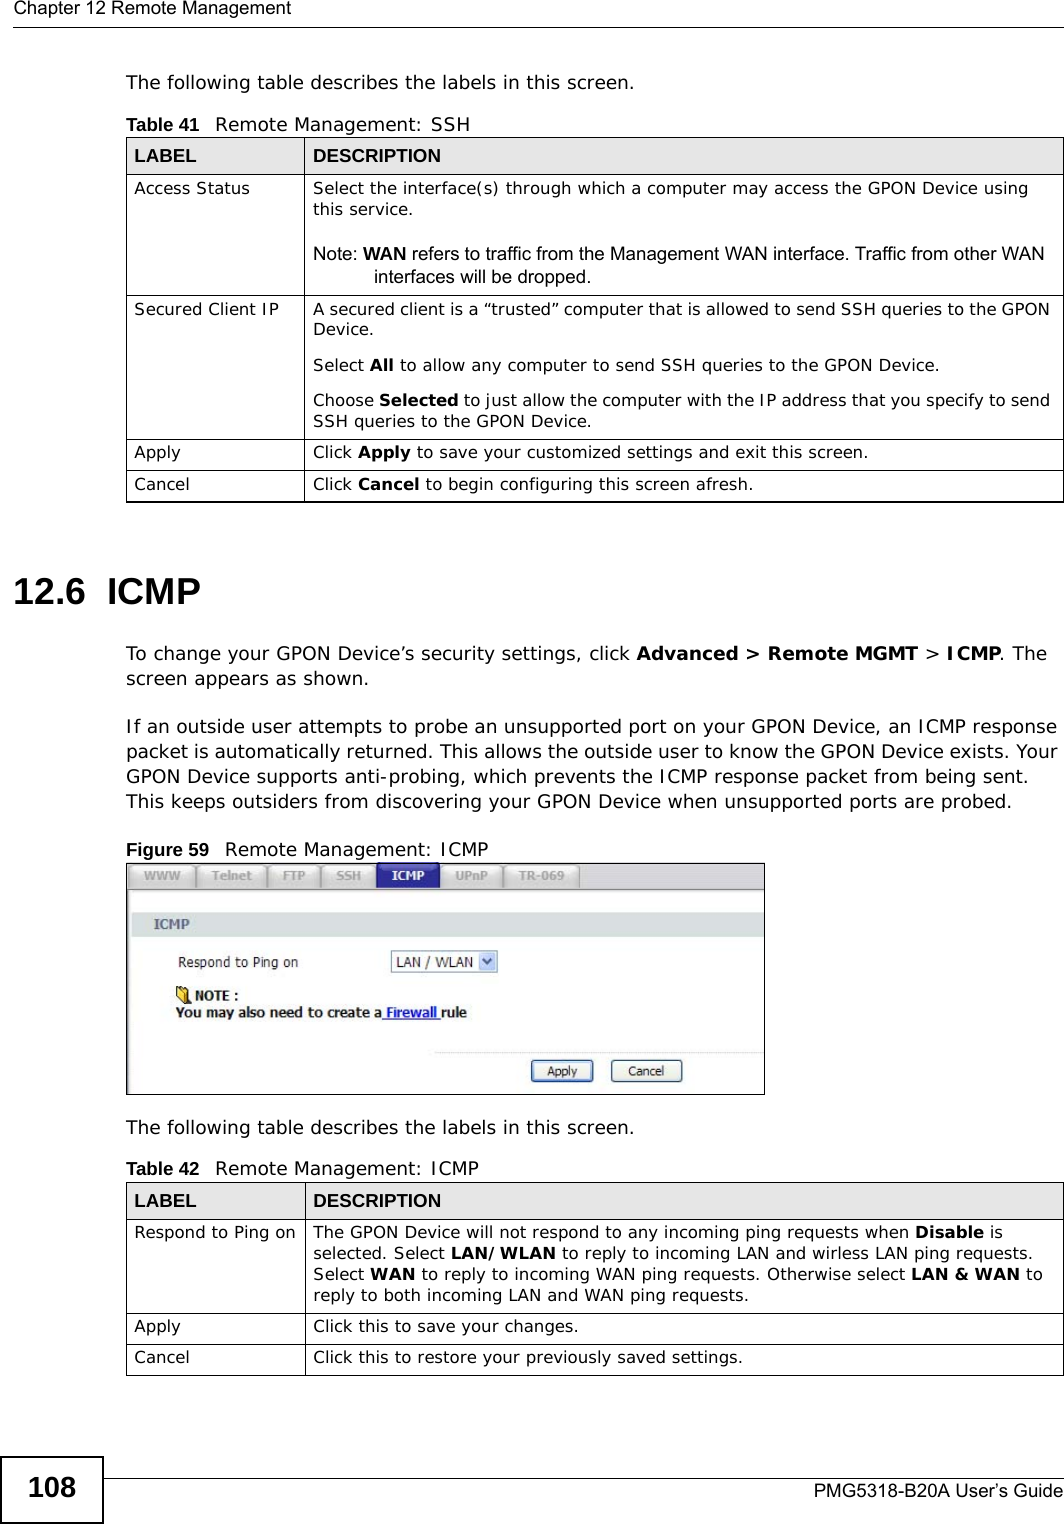 Chapter 12 Remote ManagementPMG5318-B20A User’s Guide108The following table describes the labels in this screen. 12.6  ICMPTo change your GPON Device’s security settings, click Advanced &gt; Remote MGMT &gt; ICMP. The screen appears as shown.If an outside user attempts to probe an unsupported port on your GPON Device, an ICMP response packet is automatically returned. This allows the outside user to know the GPON Device exists. Your GPON Device supports anti-probing, which prevents the ICMP response packet from being sent. This keeps outsiders from discovering your GPON Device when unsupported ports are probed. Figure 59   Remote Management: ICMPThe following table describes the labels in this screen.  Table 41   Remote Management: SSHLABEL DESCRIPTIONAccess Status Select the interface(s) through which a computer may access the GPON Device using this service.Note: WAN refers to traffic from the Management WAN interface. Traffic from other WAN interfaces will be dropped.Secured Client IP A secured client is a “trusted” computer that is allowed to send SSH queries to the GPON Device.Select All to allow any computer to send SSH queries to the GPON Device.Choose Selected to just allow the computer with the IP address that you specify to send SSH queries to the GPON Device.Apply Click Apply to save your customized settings and exit this screen. Cancel Click Cancel to begin configuring this screen afresh.Table 42   Remote Management: ICMPLABEL DESCRIPTIONRespond to Ping on The GPON Device will not respond to any incoming ping requests when Disable is selected. Select LAN/WLAN to reply to incoming LAN and wirless LAN ping requests. Select WAN to reply to incoming WAN ping requests. Otherwise select LAN &amp; WAN to reply to both incoming LAN and WAN ping requests. Apply Click this to save your changes.Cancel Click this to restore your previously saved settings.